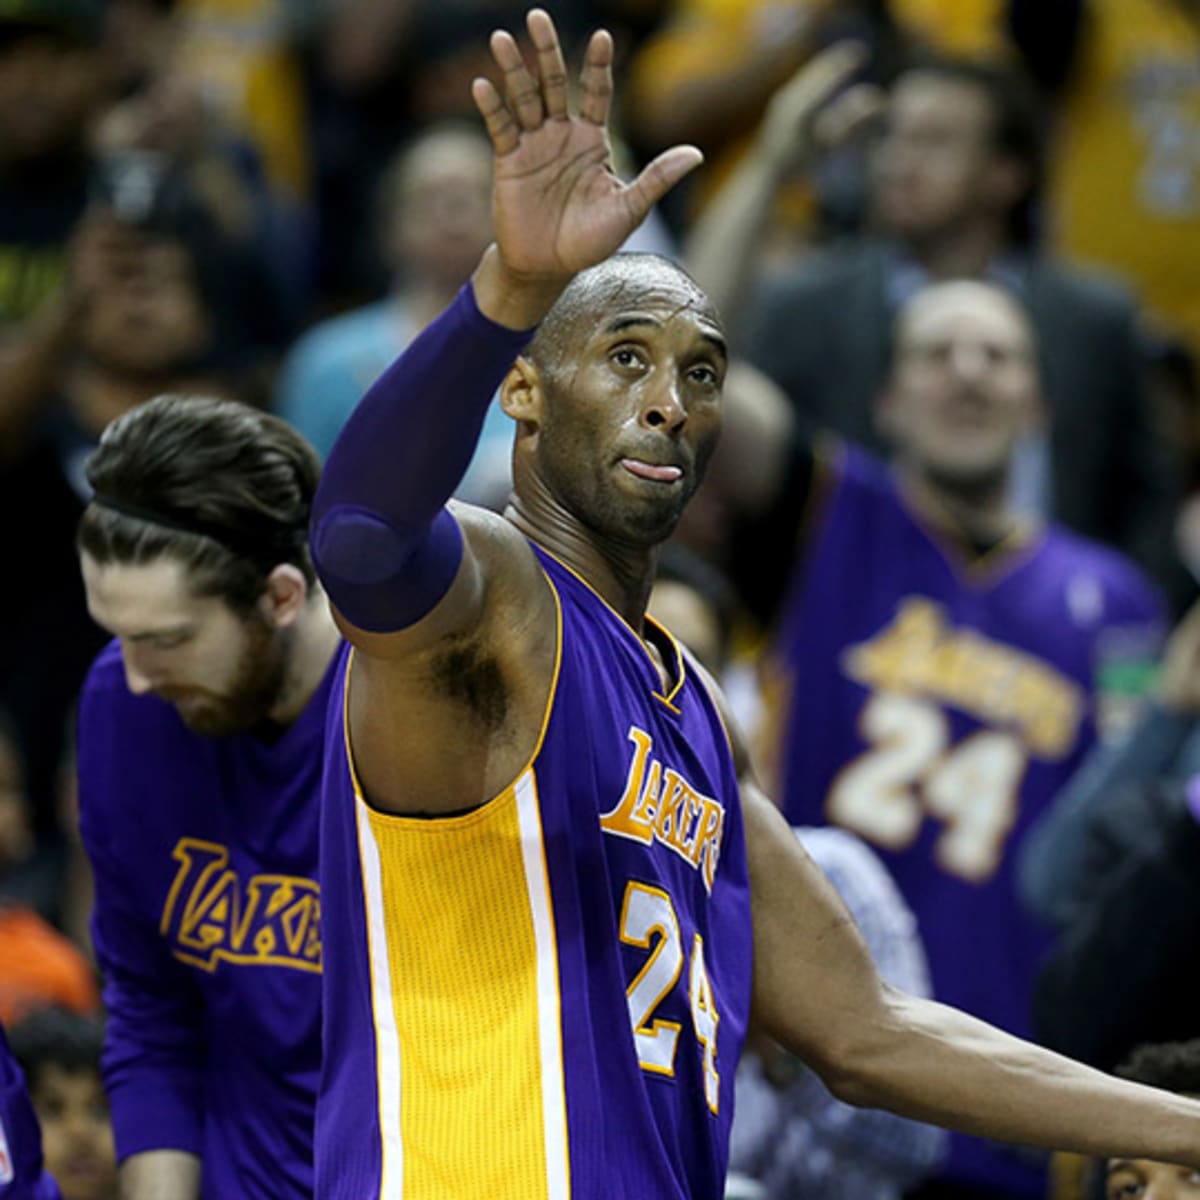 This is a fantastic story about Kobe Bryant's insane work ethic